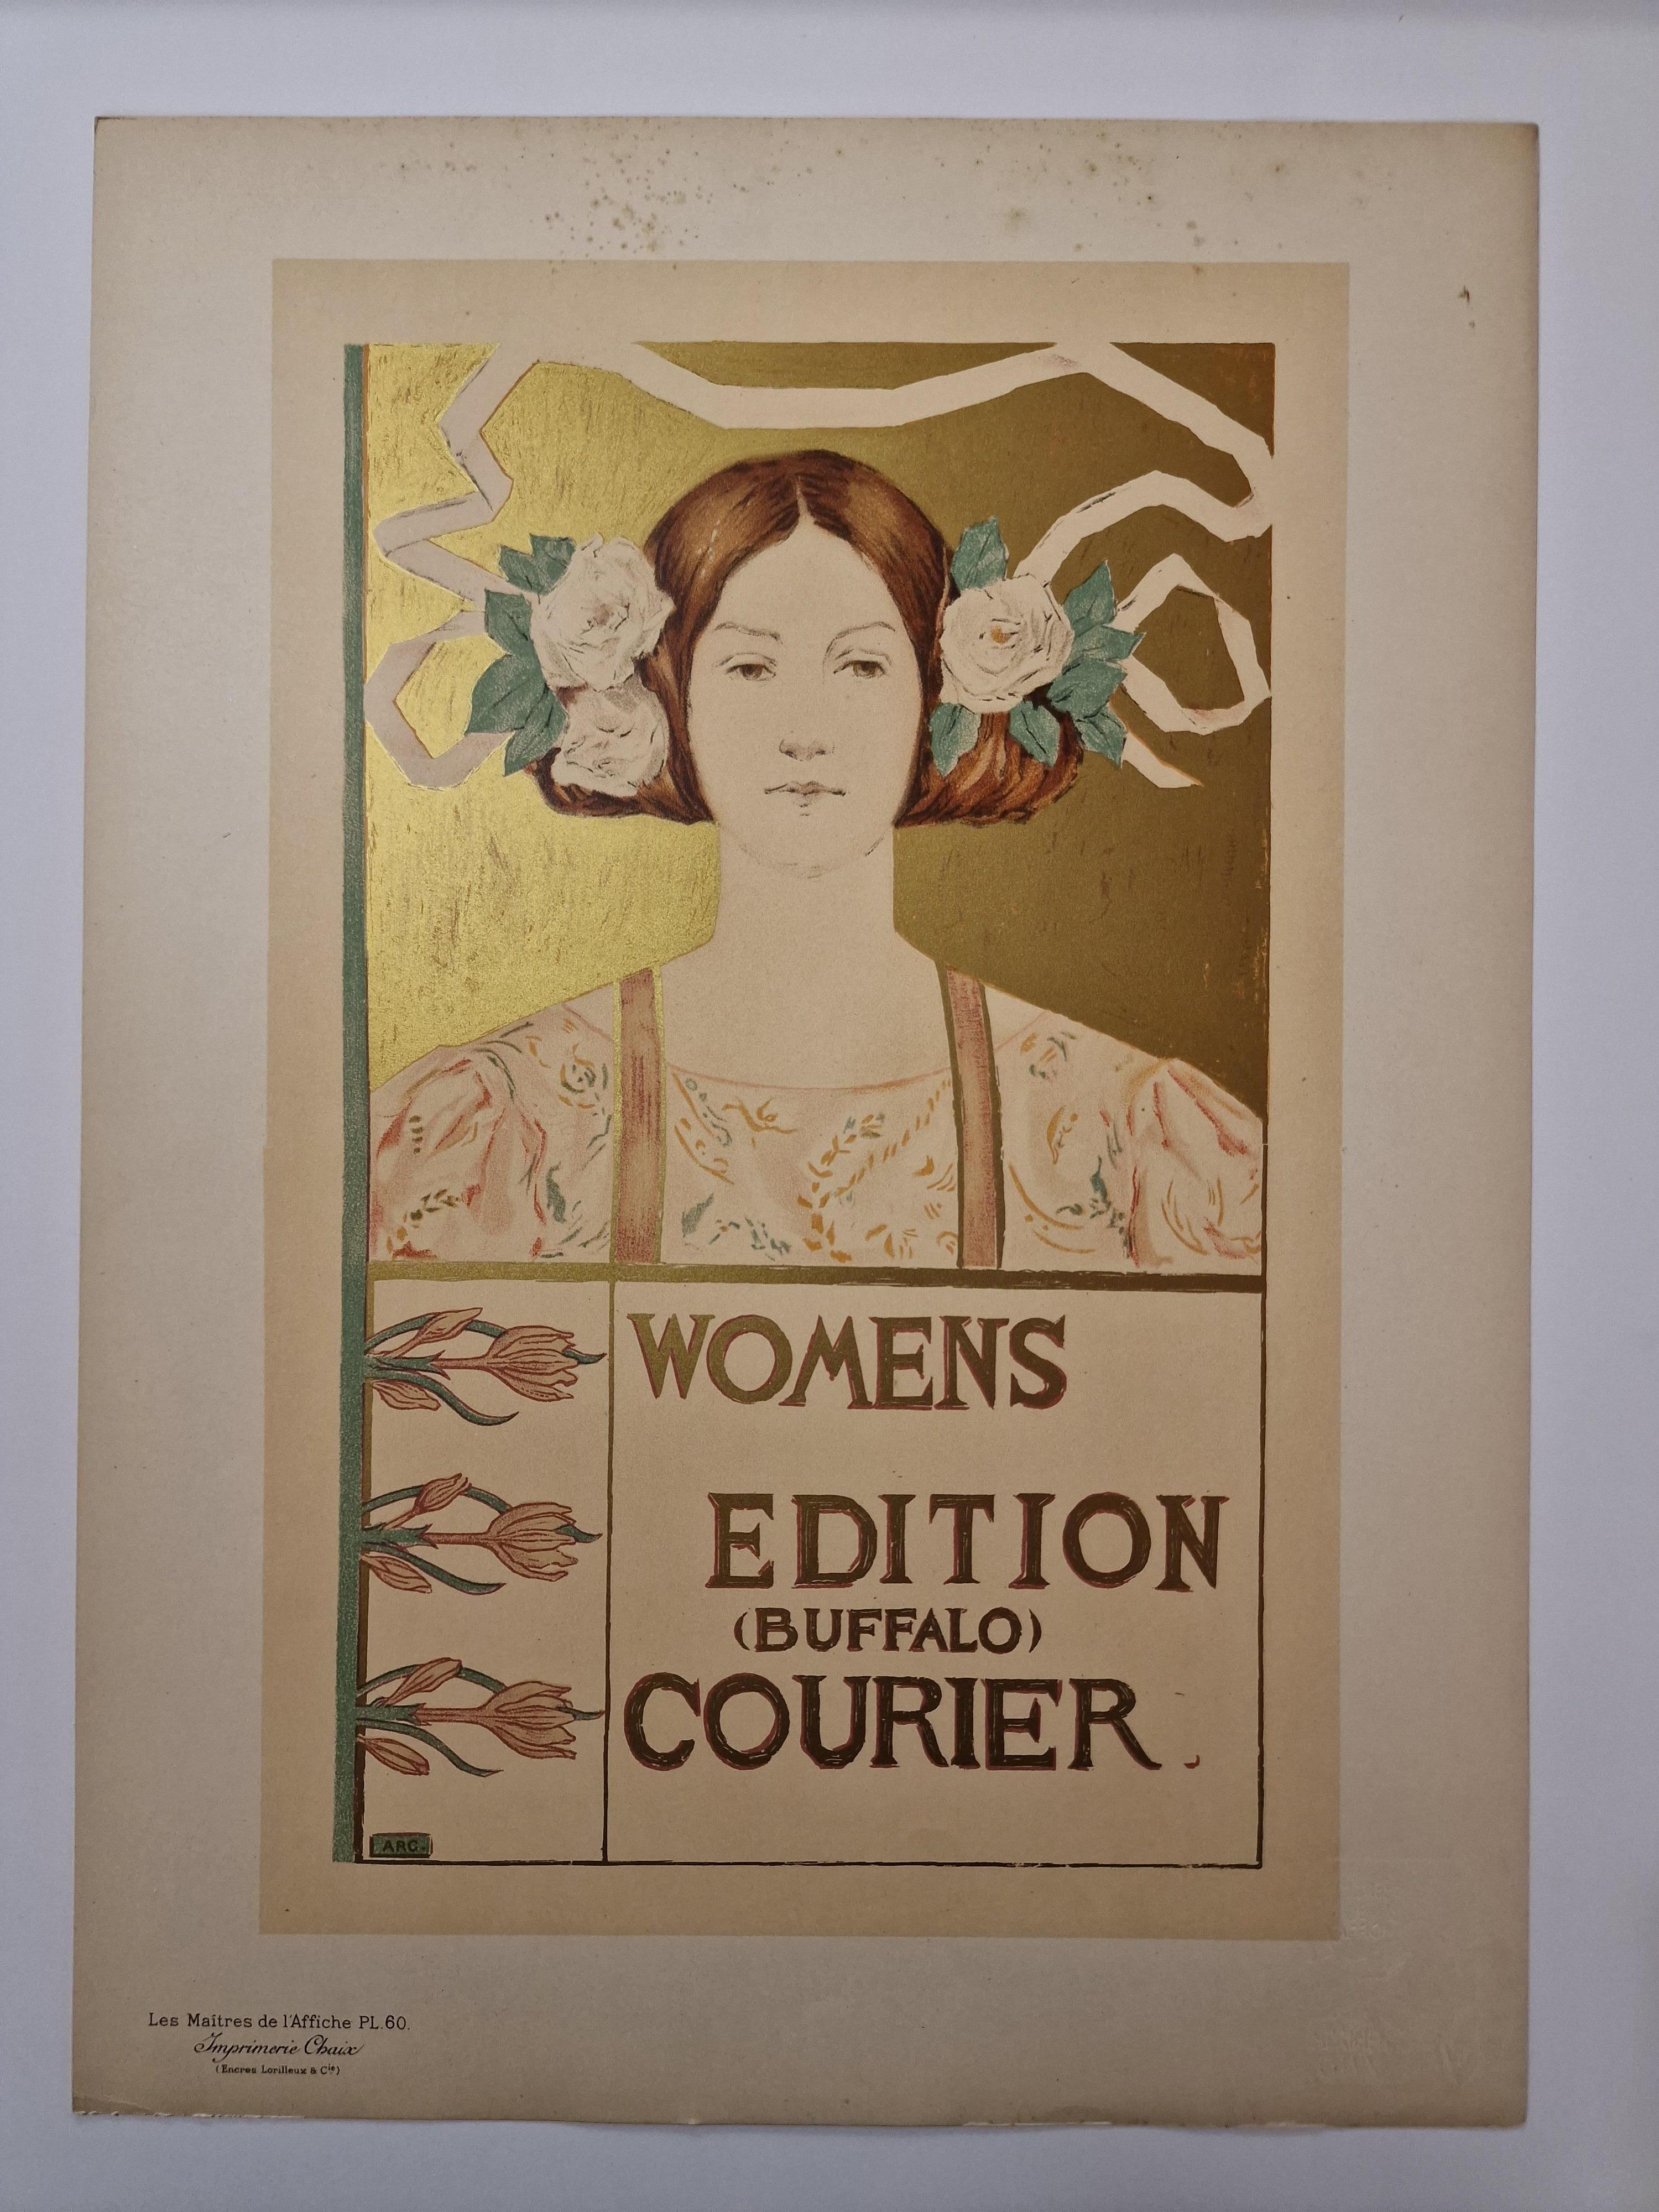 Women's edition Buffalo Courrier - Print by Alice R. Glenny